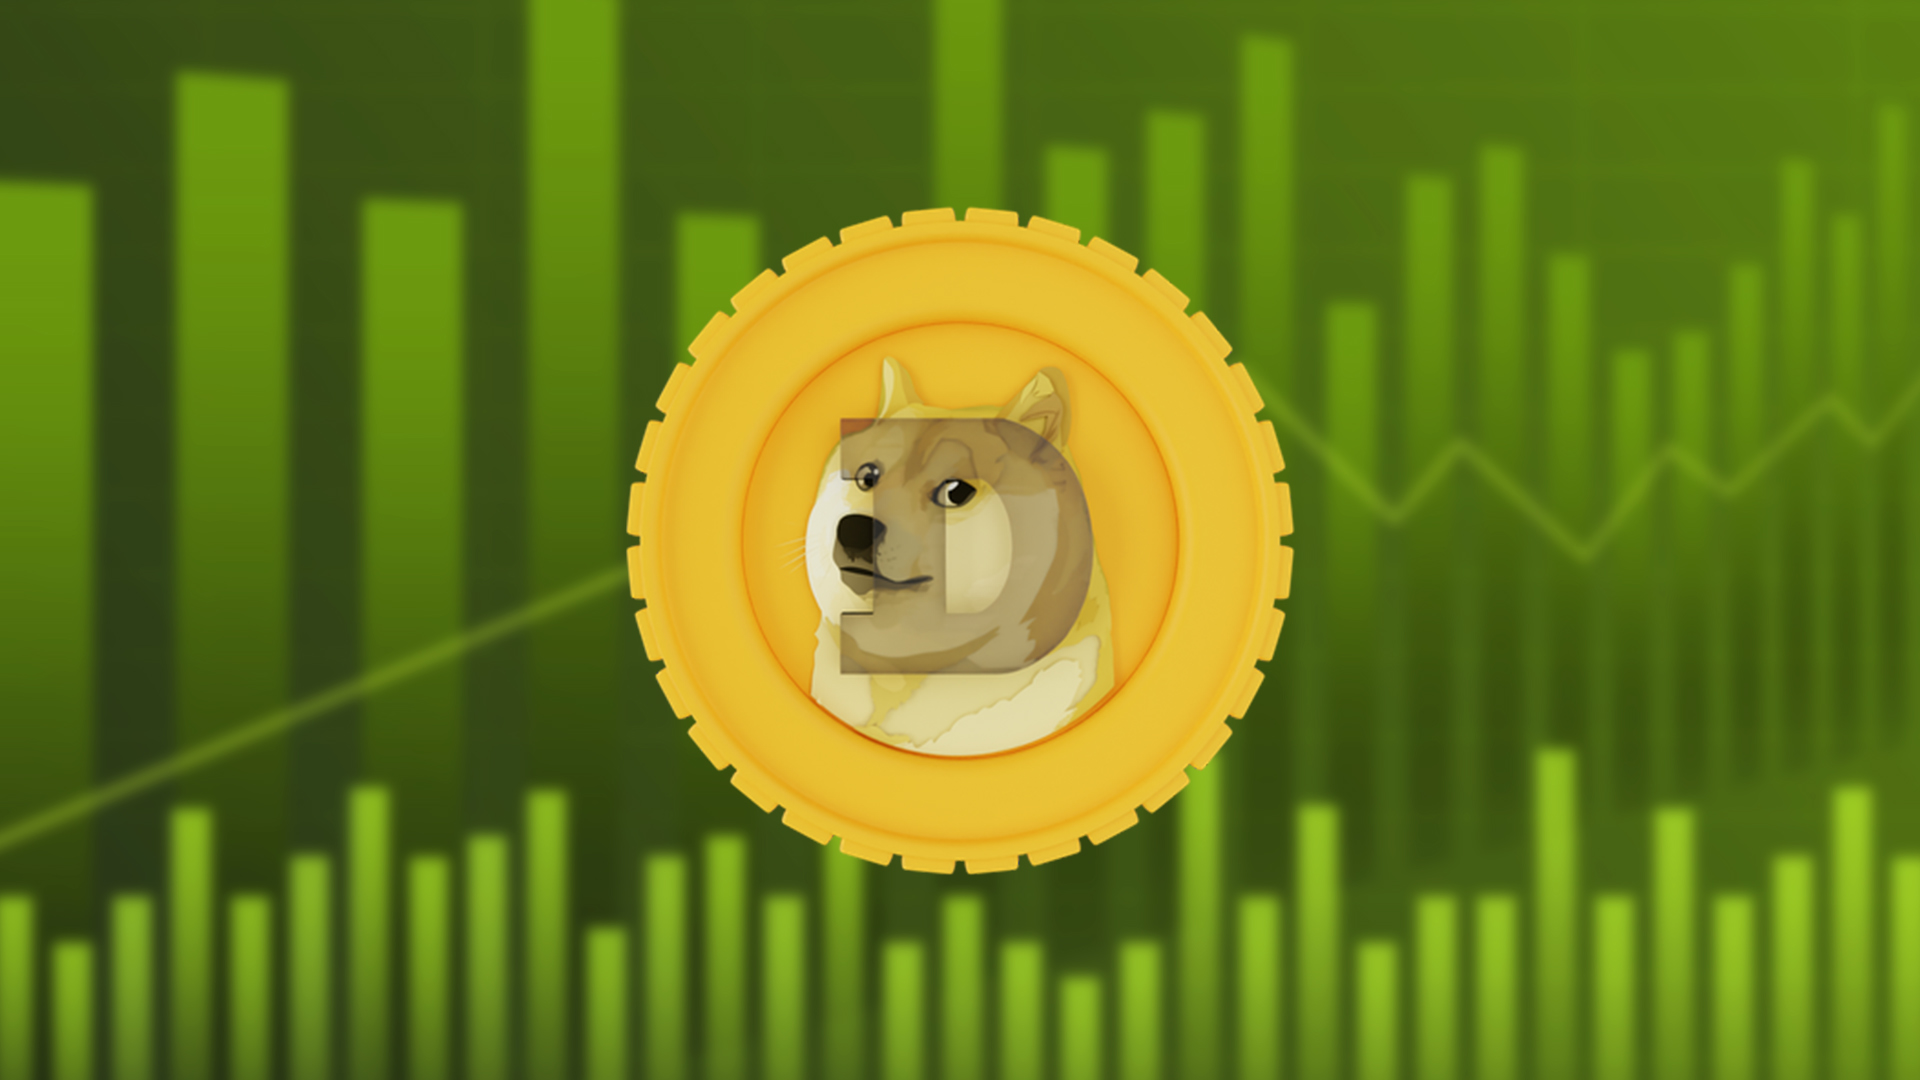 DOGE Price Analysis: Will DOGE Give Breakout?